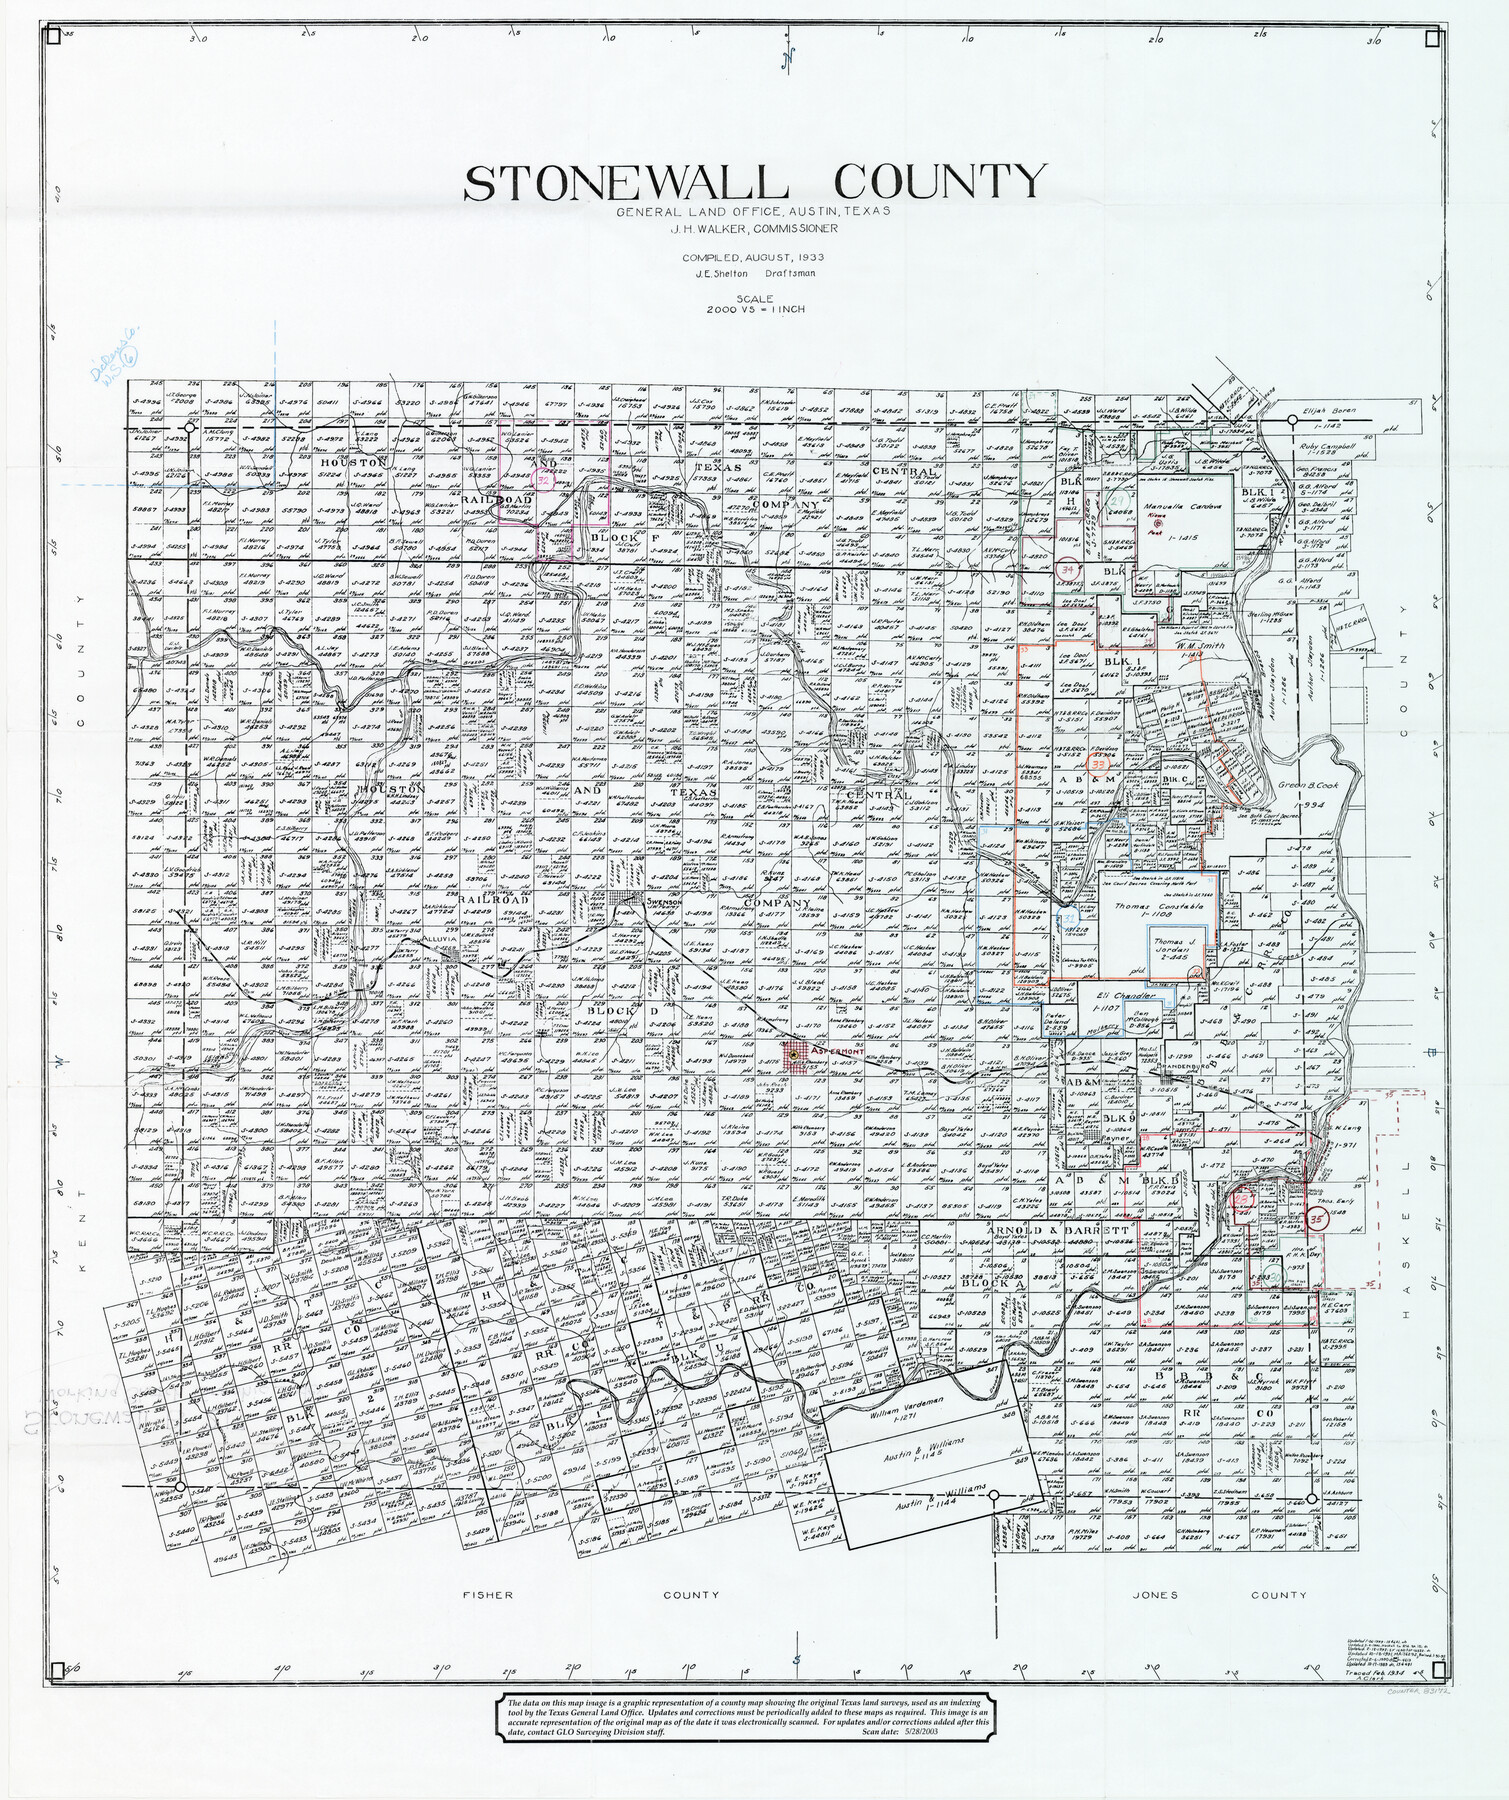 83172, Stonewall County Working Sketch Graphic Index - sheet B, General Map Collection